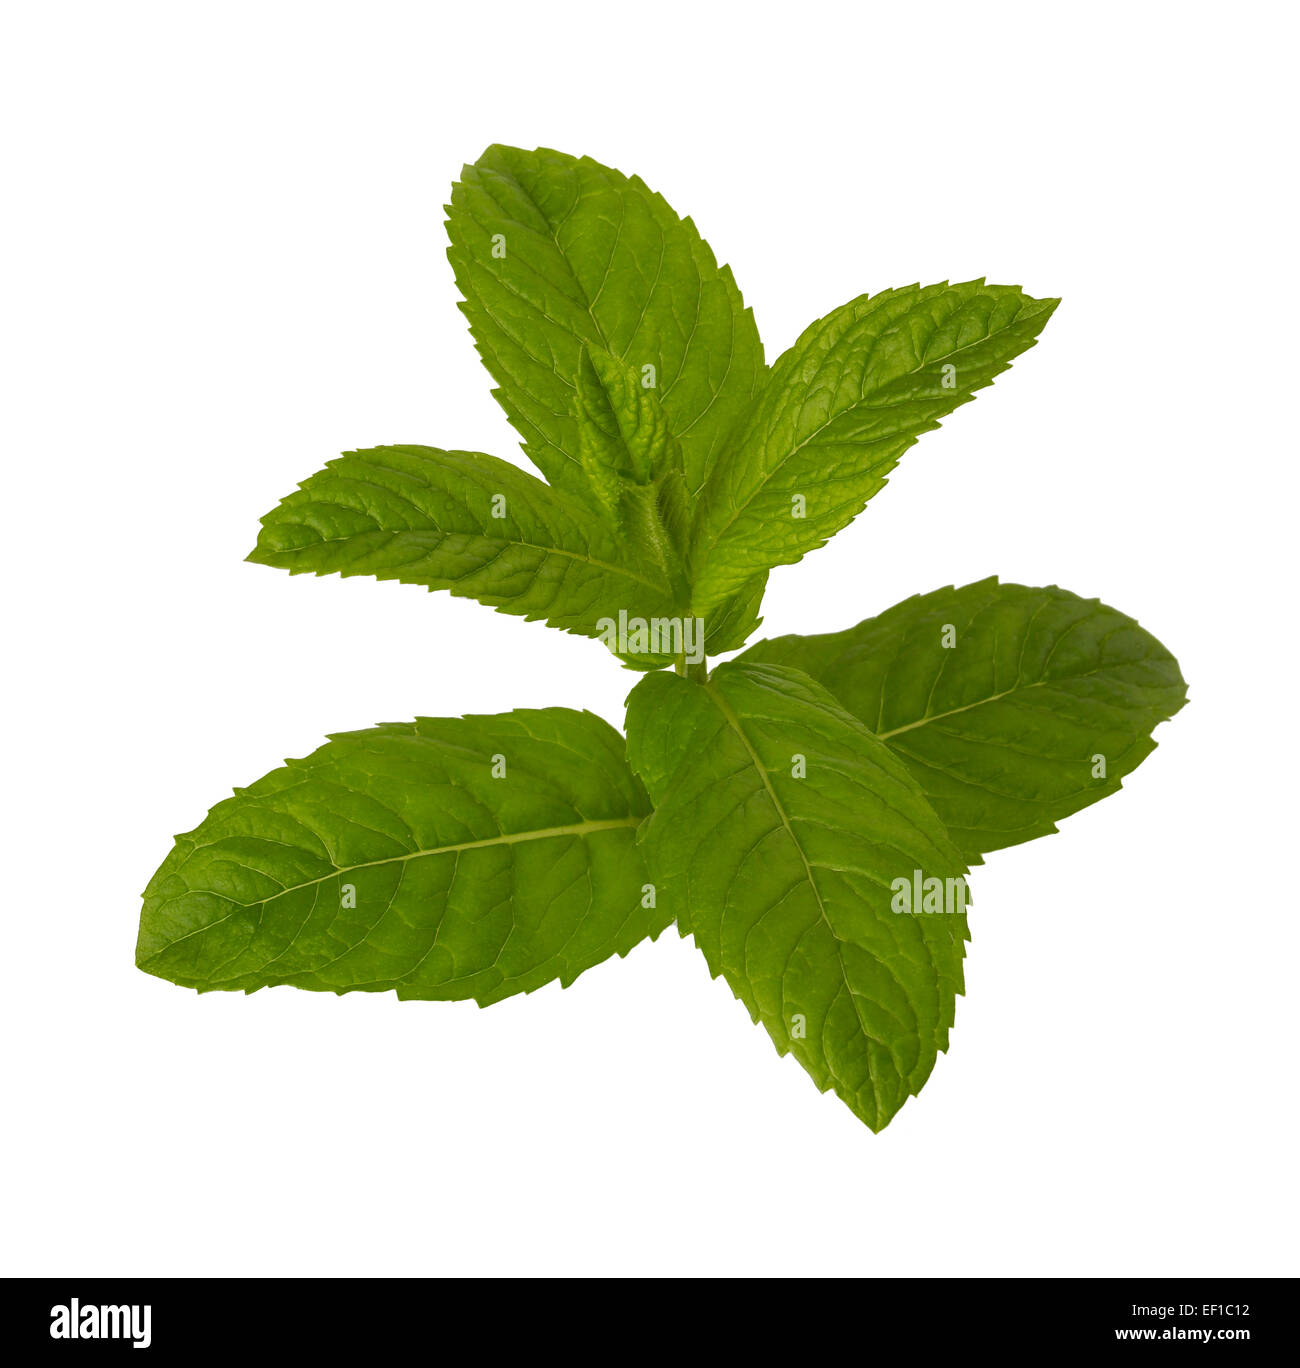 Mint leaves Stock Photo